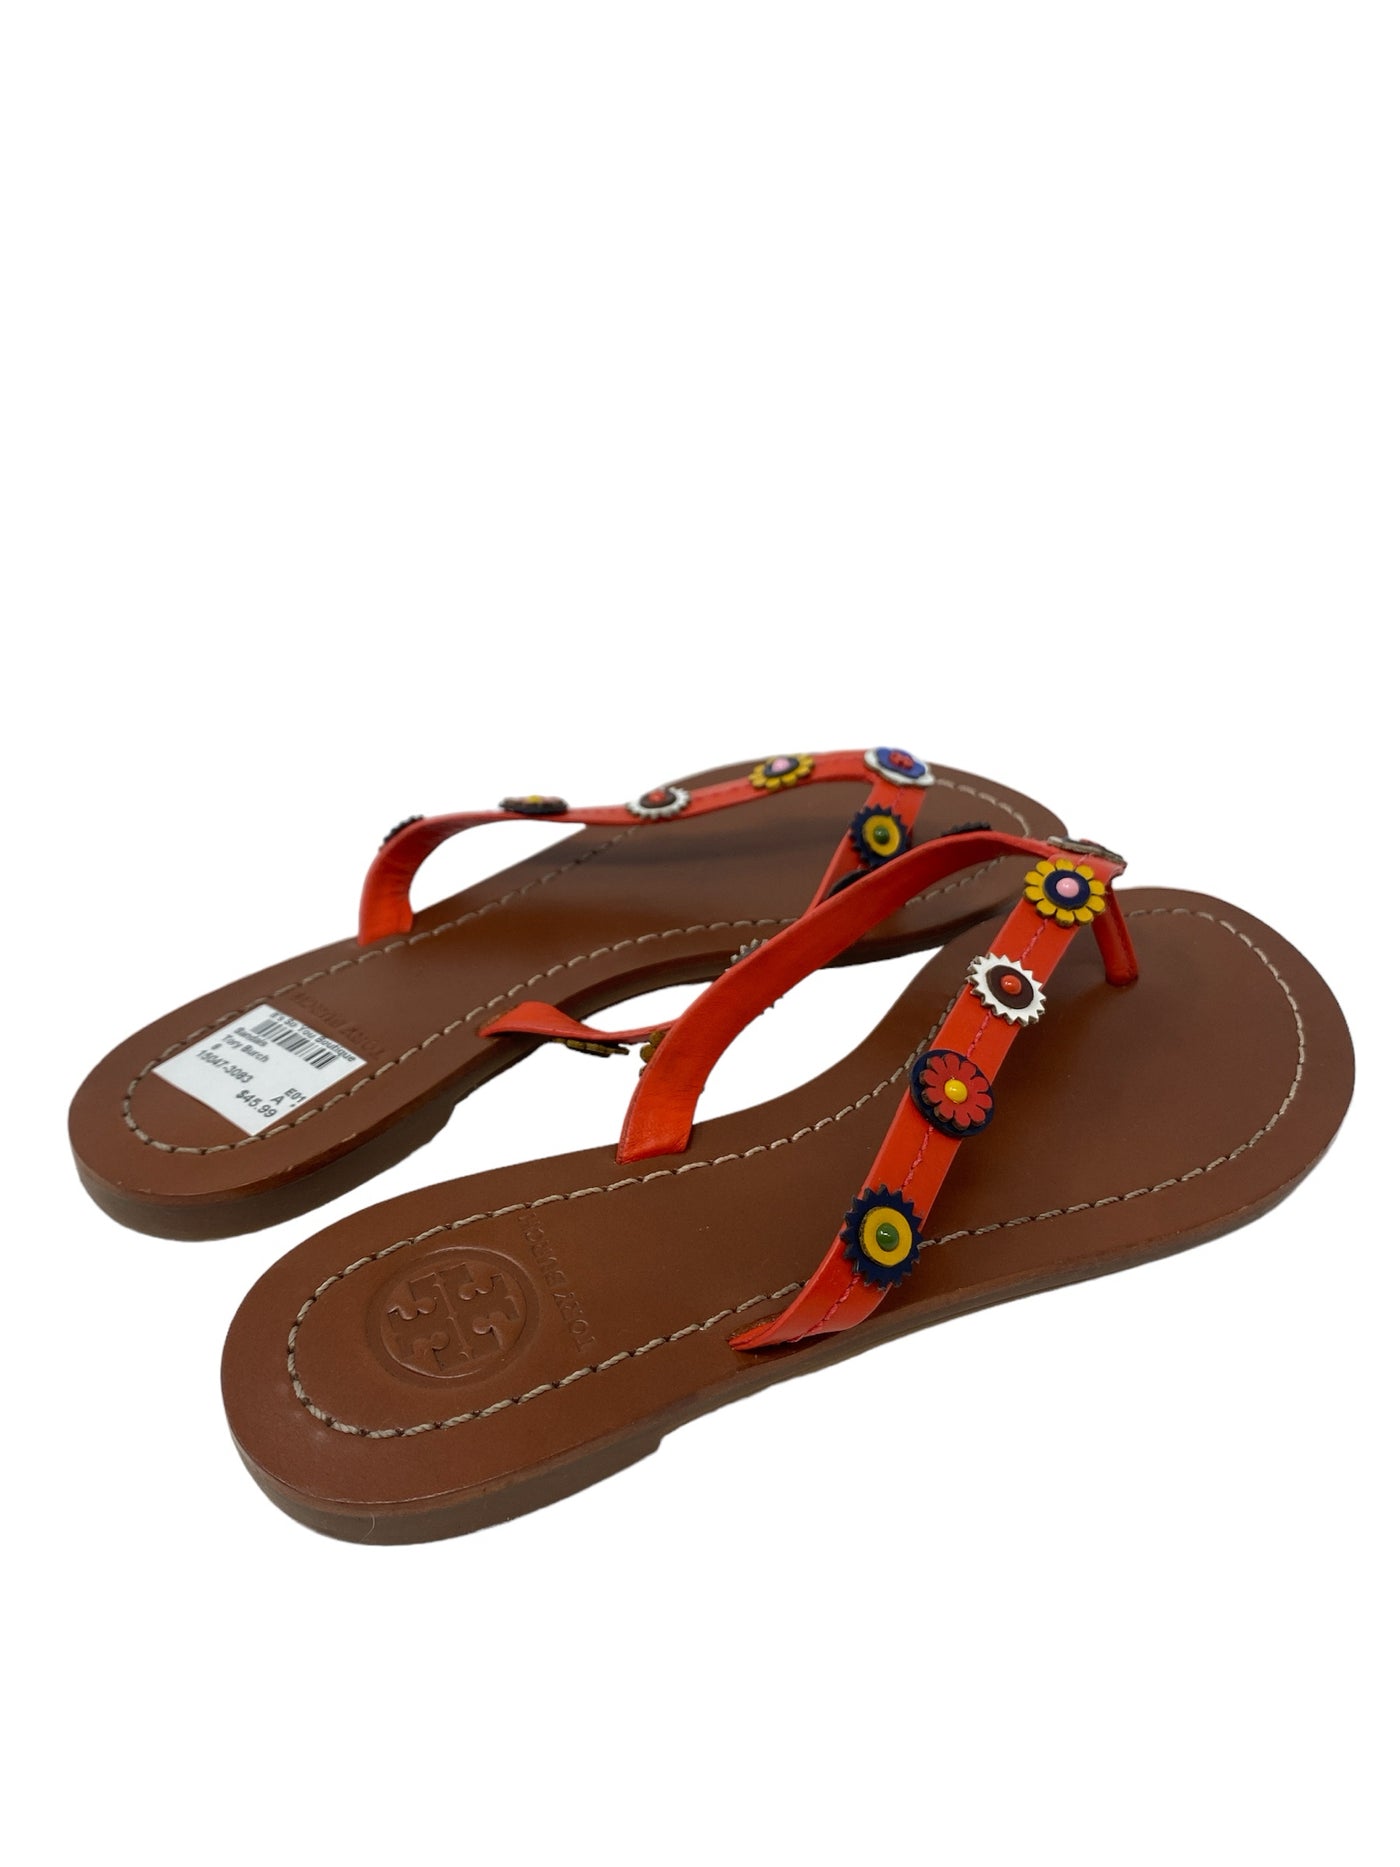 Tory Burch Women Size 6 Red Floral Sandals